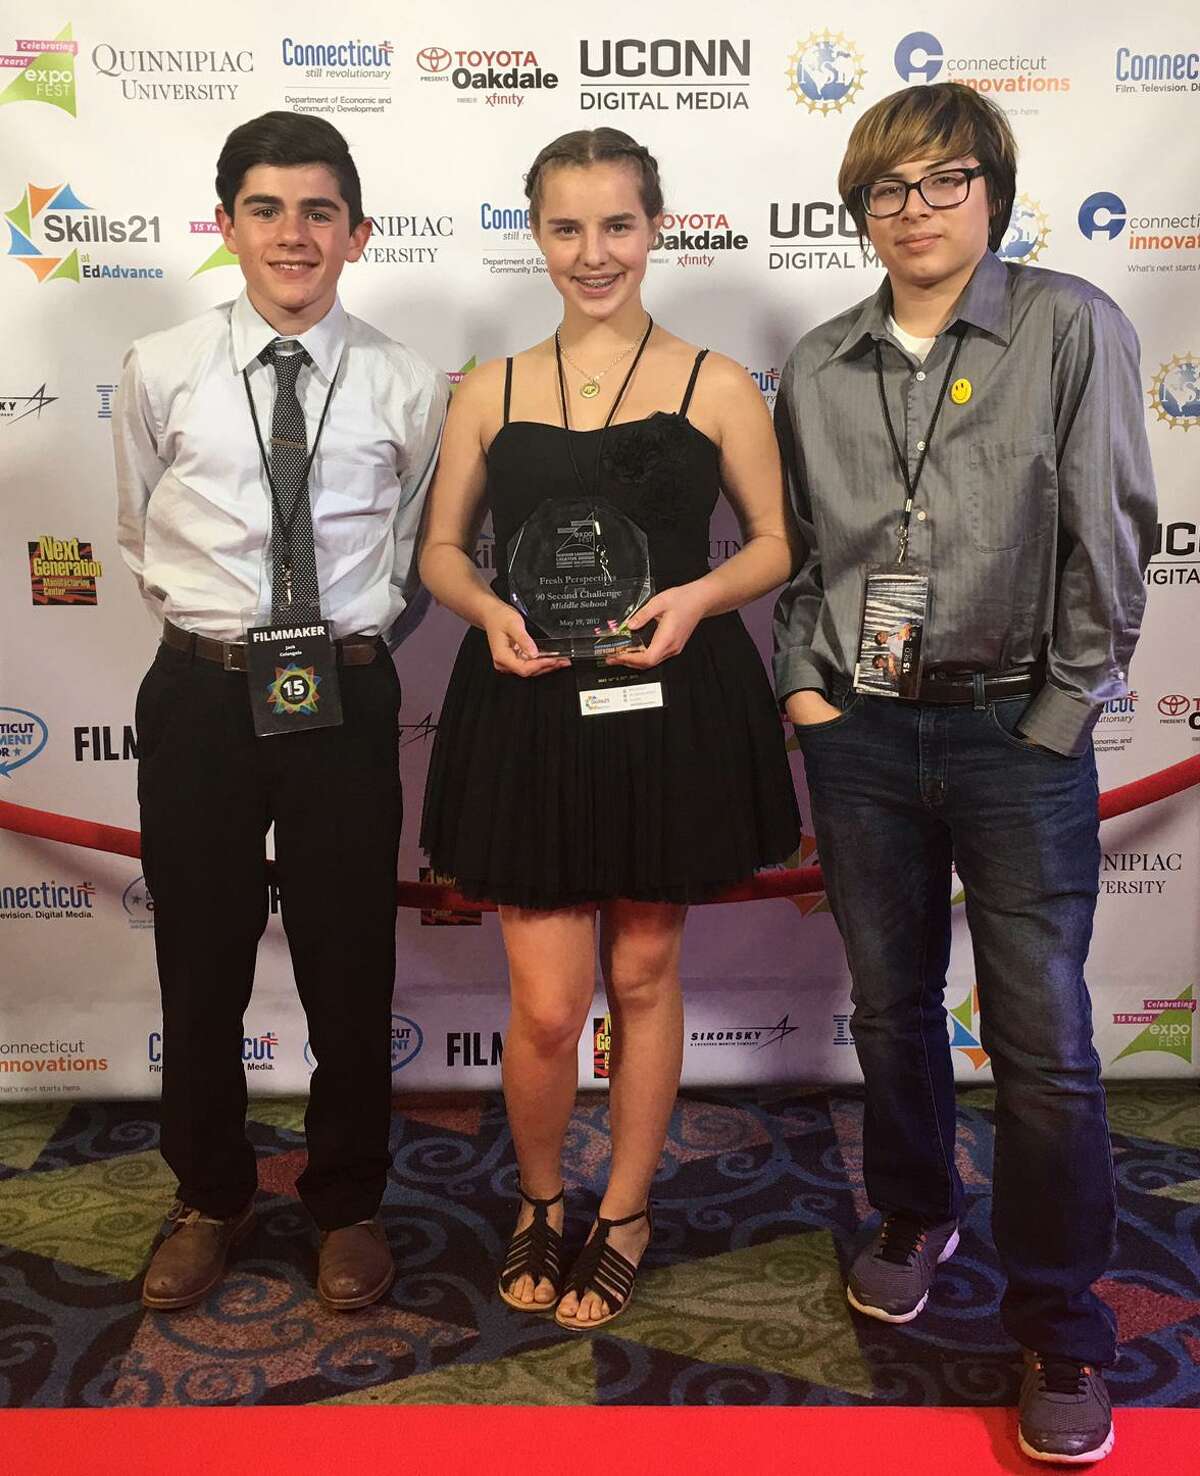 Middle school students at Shepaug Valley School in Washington recently placed first for their film ”The Epic Chase” in the category of 90-second Live Action Challenge at the 2017 Connecticut Student Film Festival held in Wallingford. The winners of the film are, from left to right, Giacomo Colangelo, Sierra Wilson and Darius Moreno.